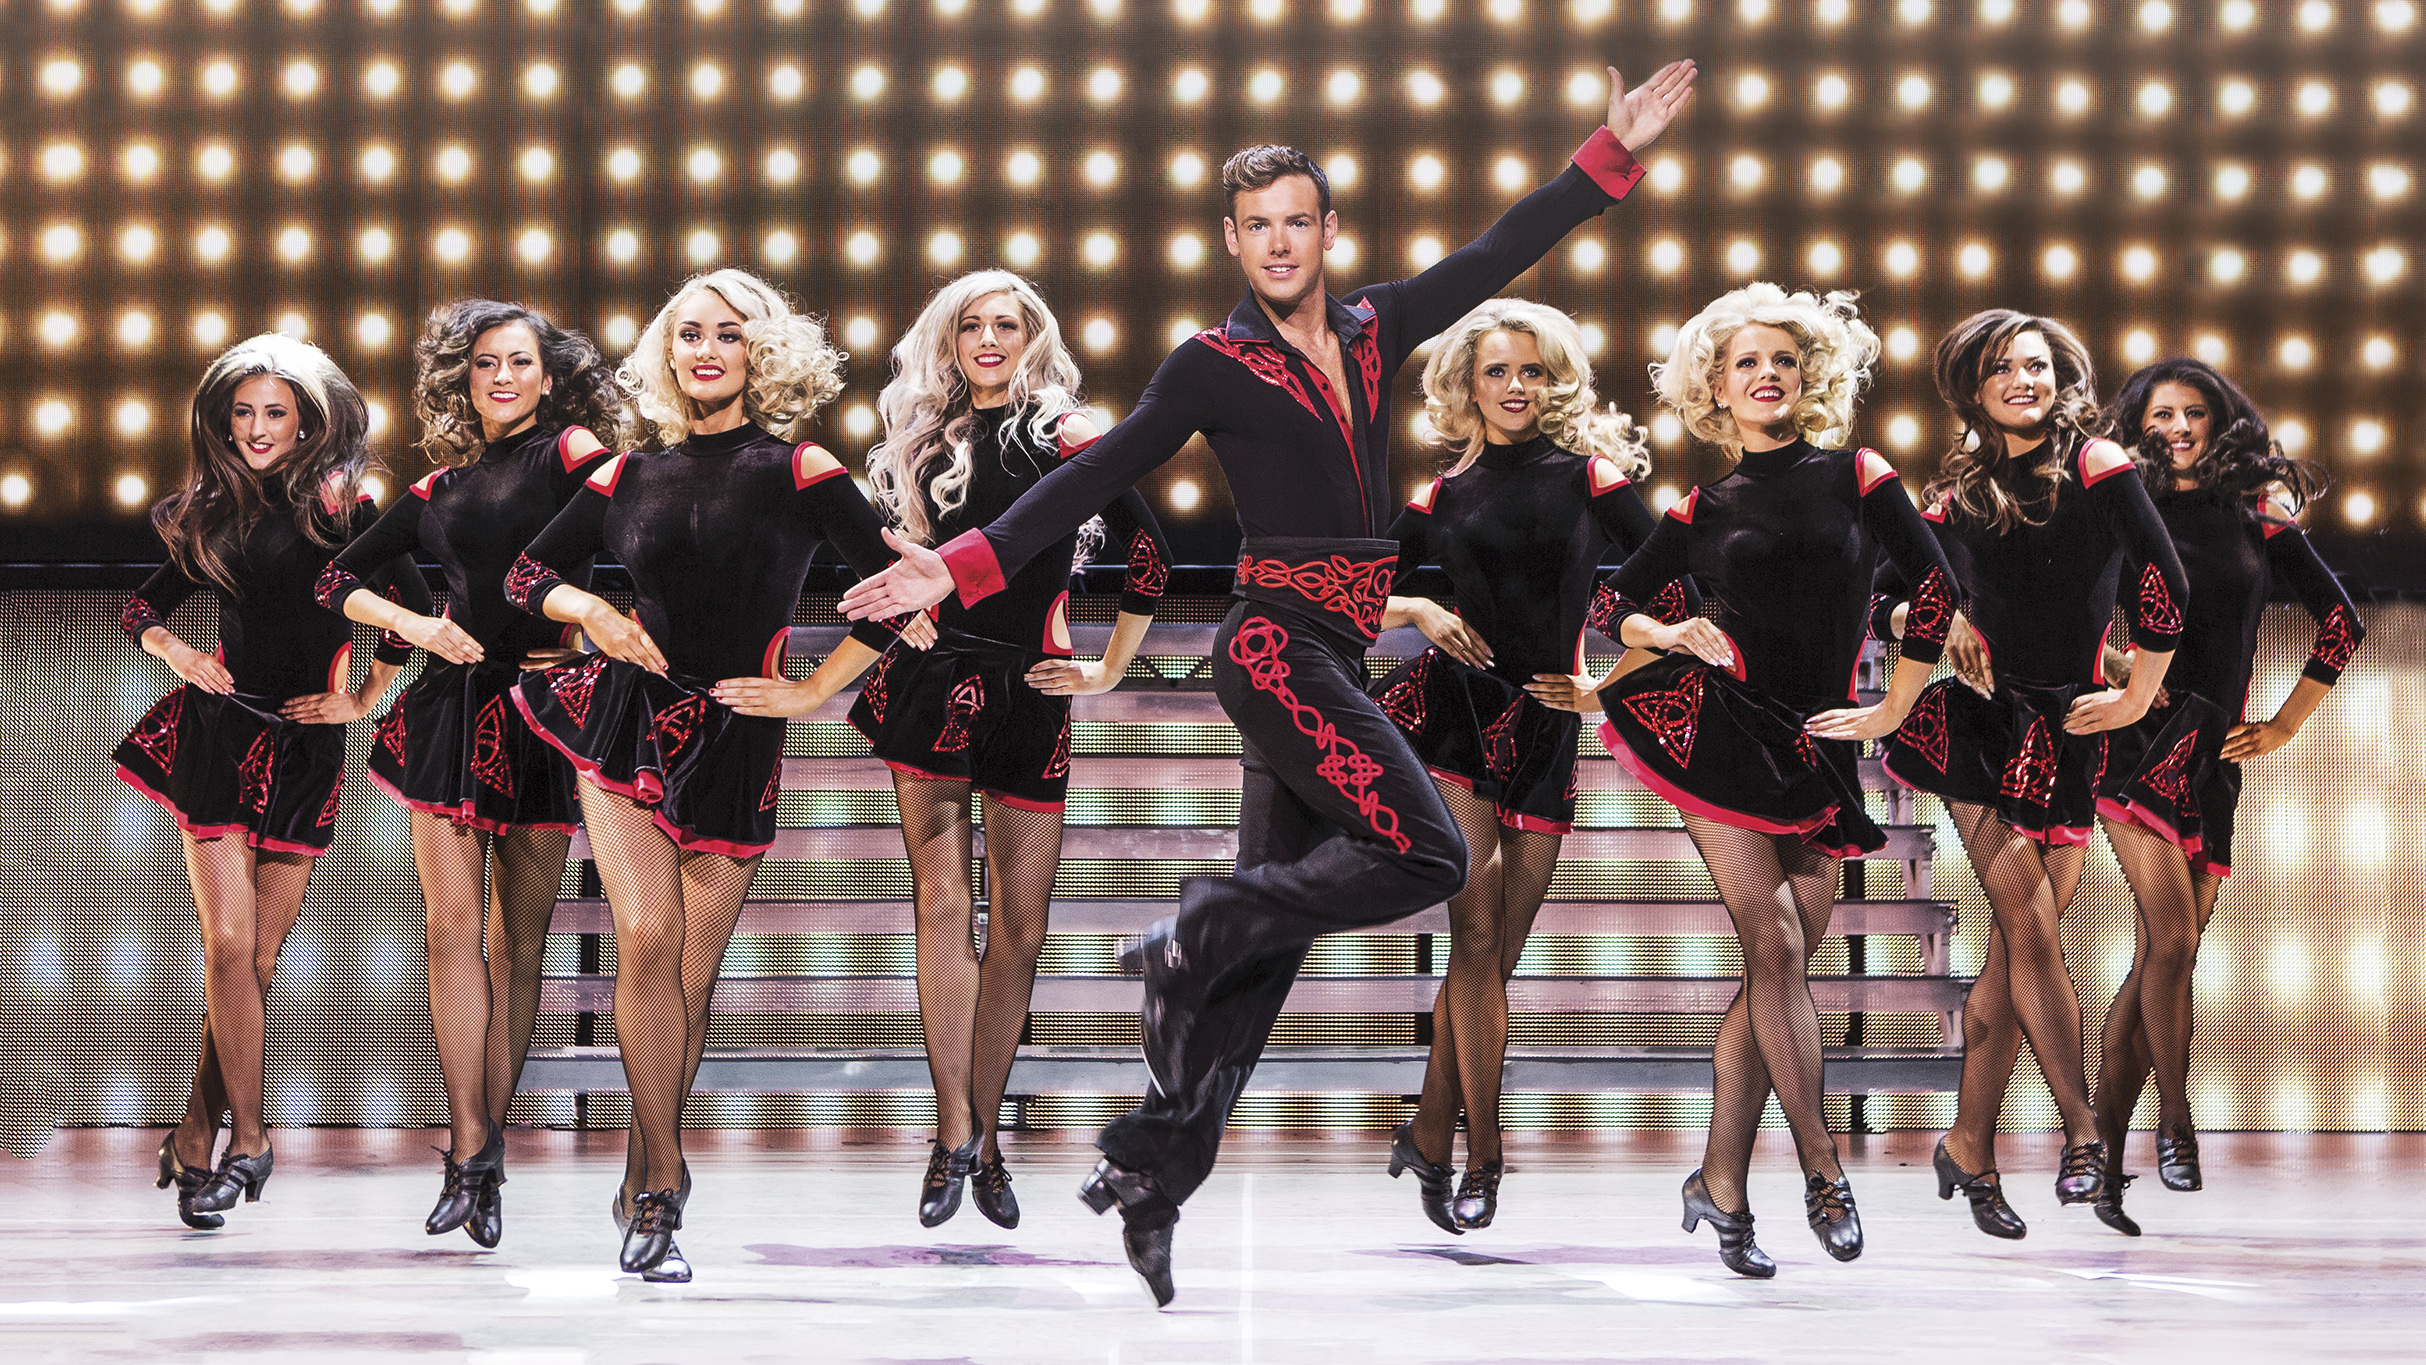 Michael Flatley's Lord of the Dance - 25th Anniversary Tour